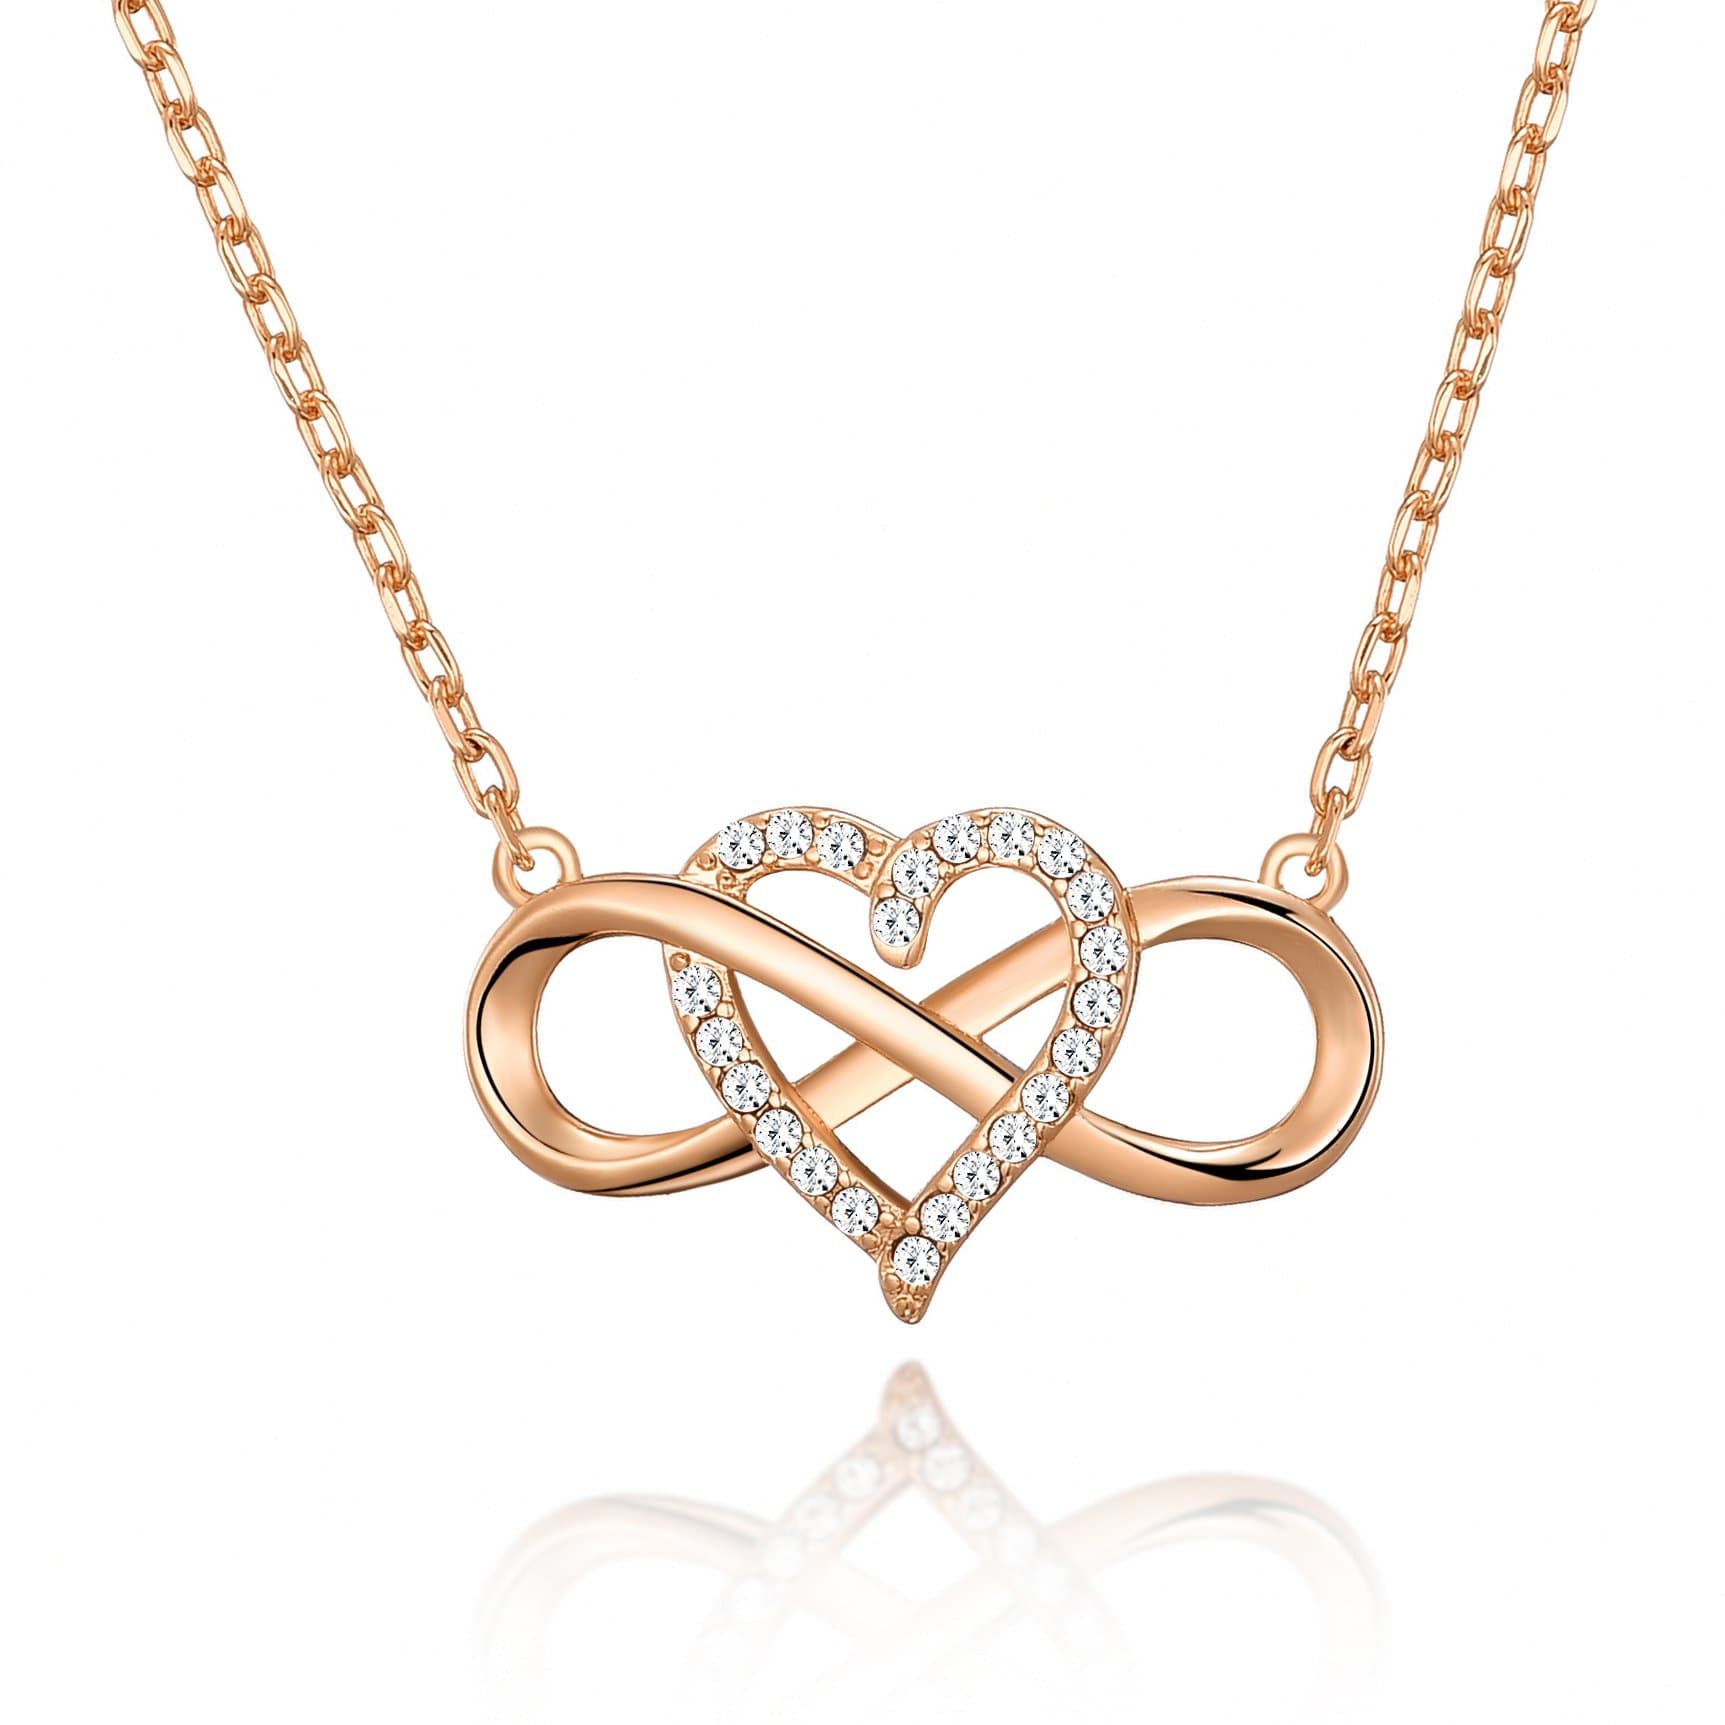 Rose Gold Plated Infinity Heart Necklace Created with Zircondia® Crystals by Philip Jones Jewellery